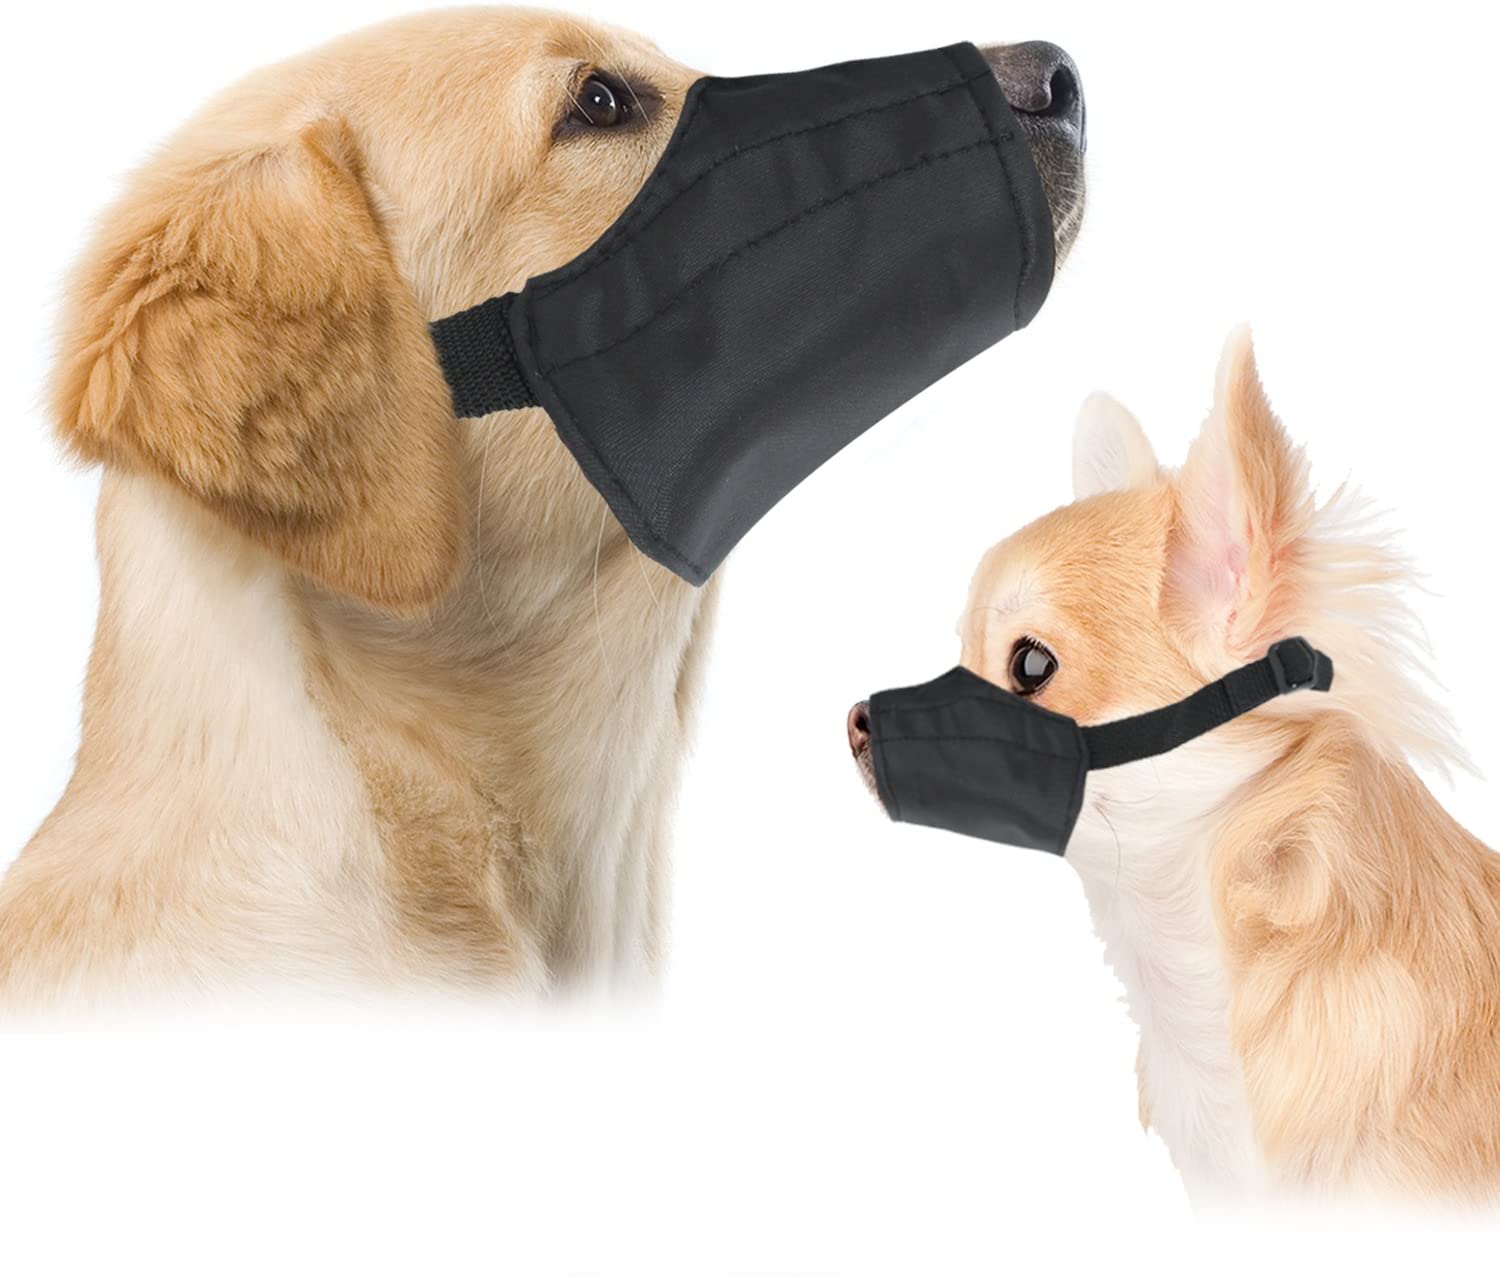 Top best dog muzzle for barking and bitting